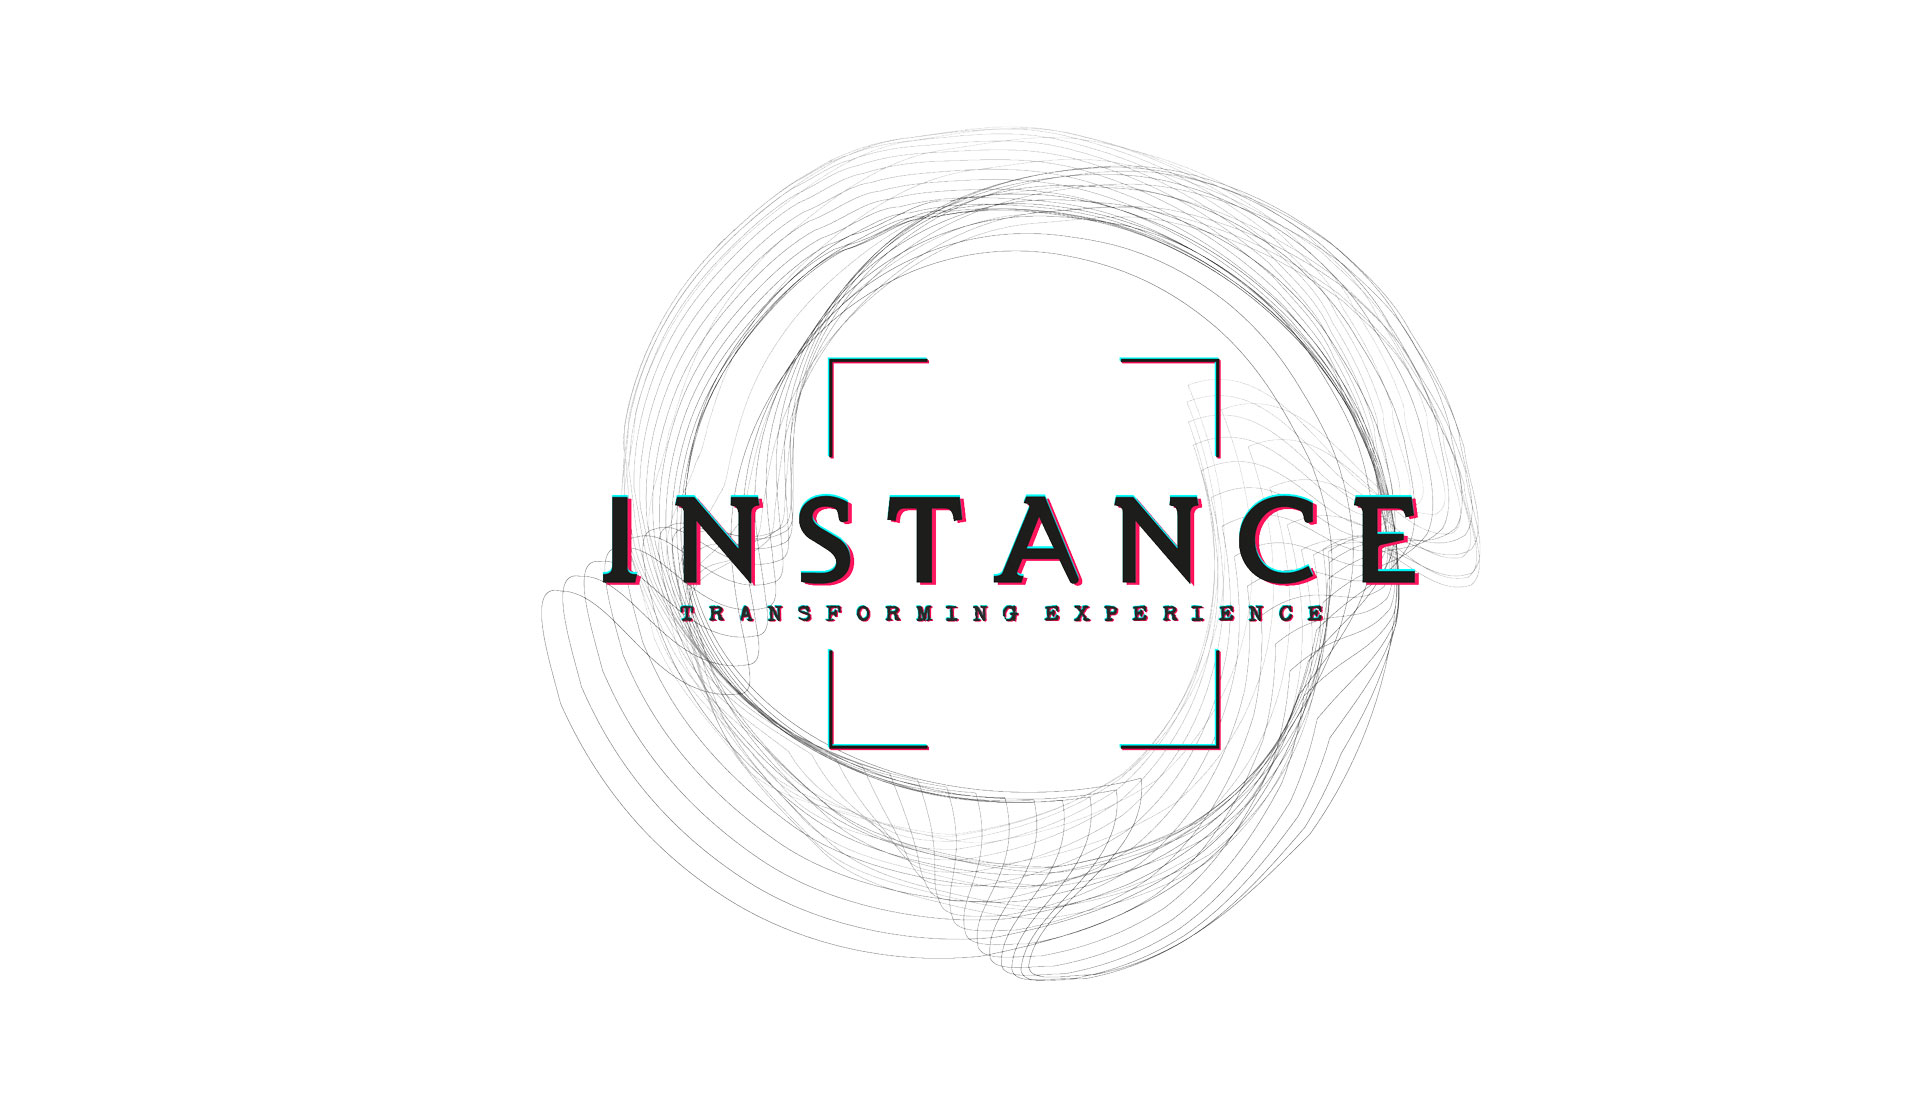 INSTANCE...Transforming Experience! 